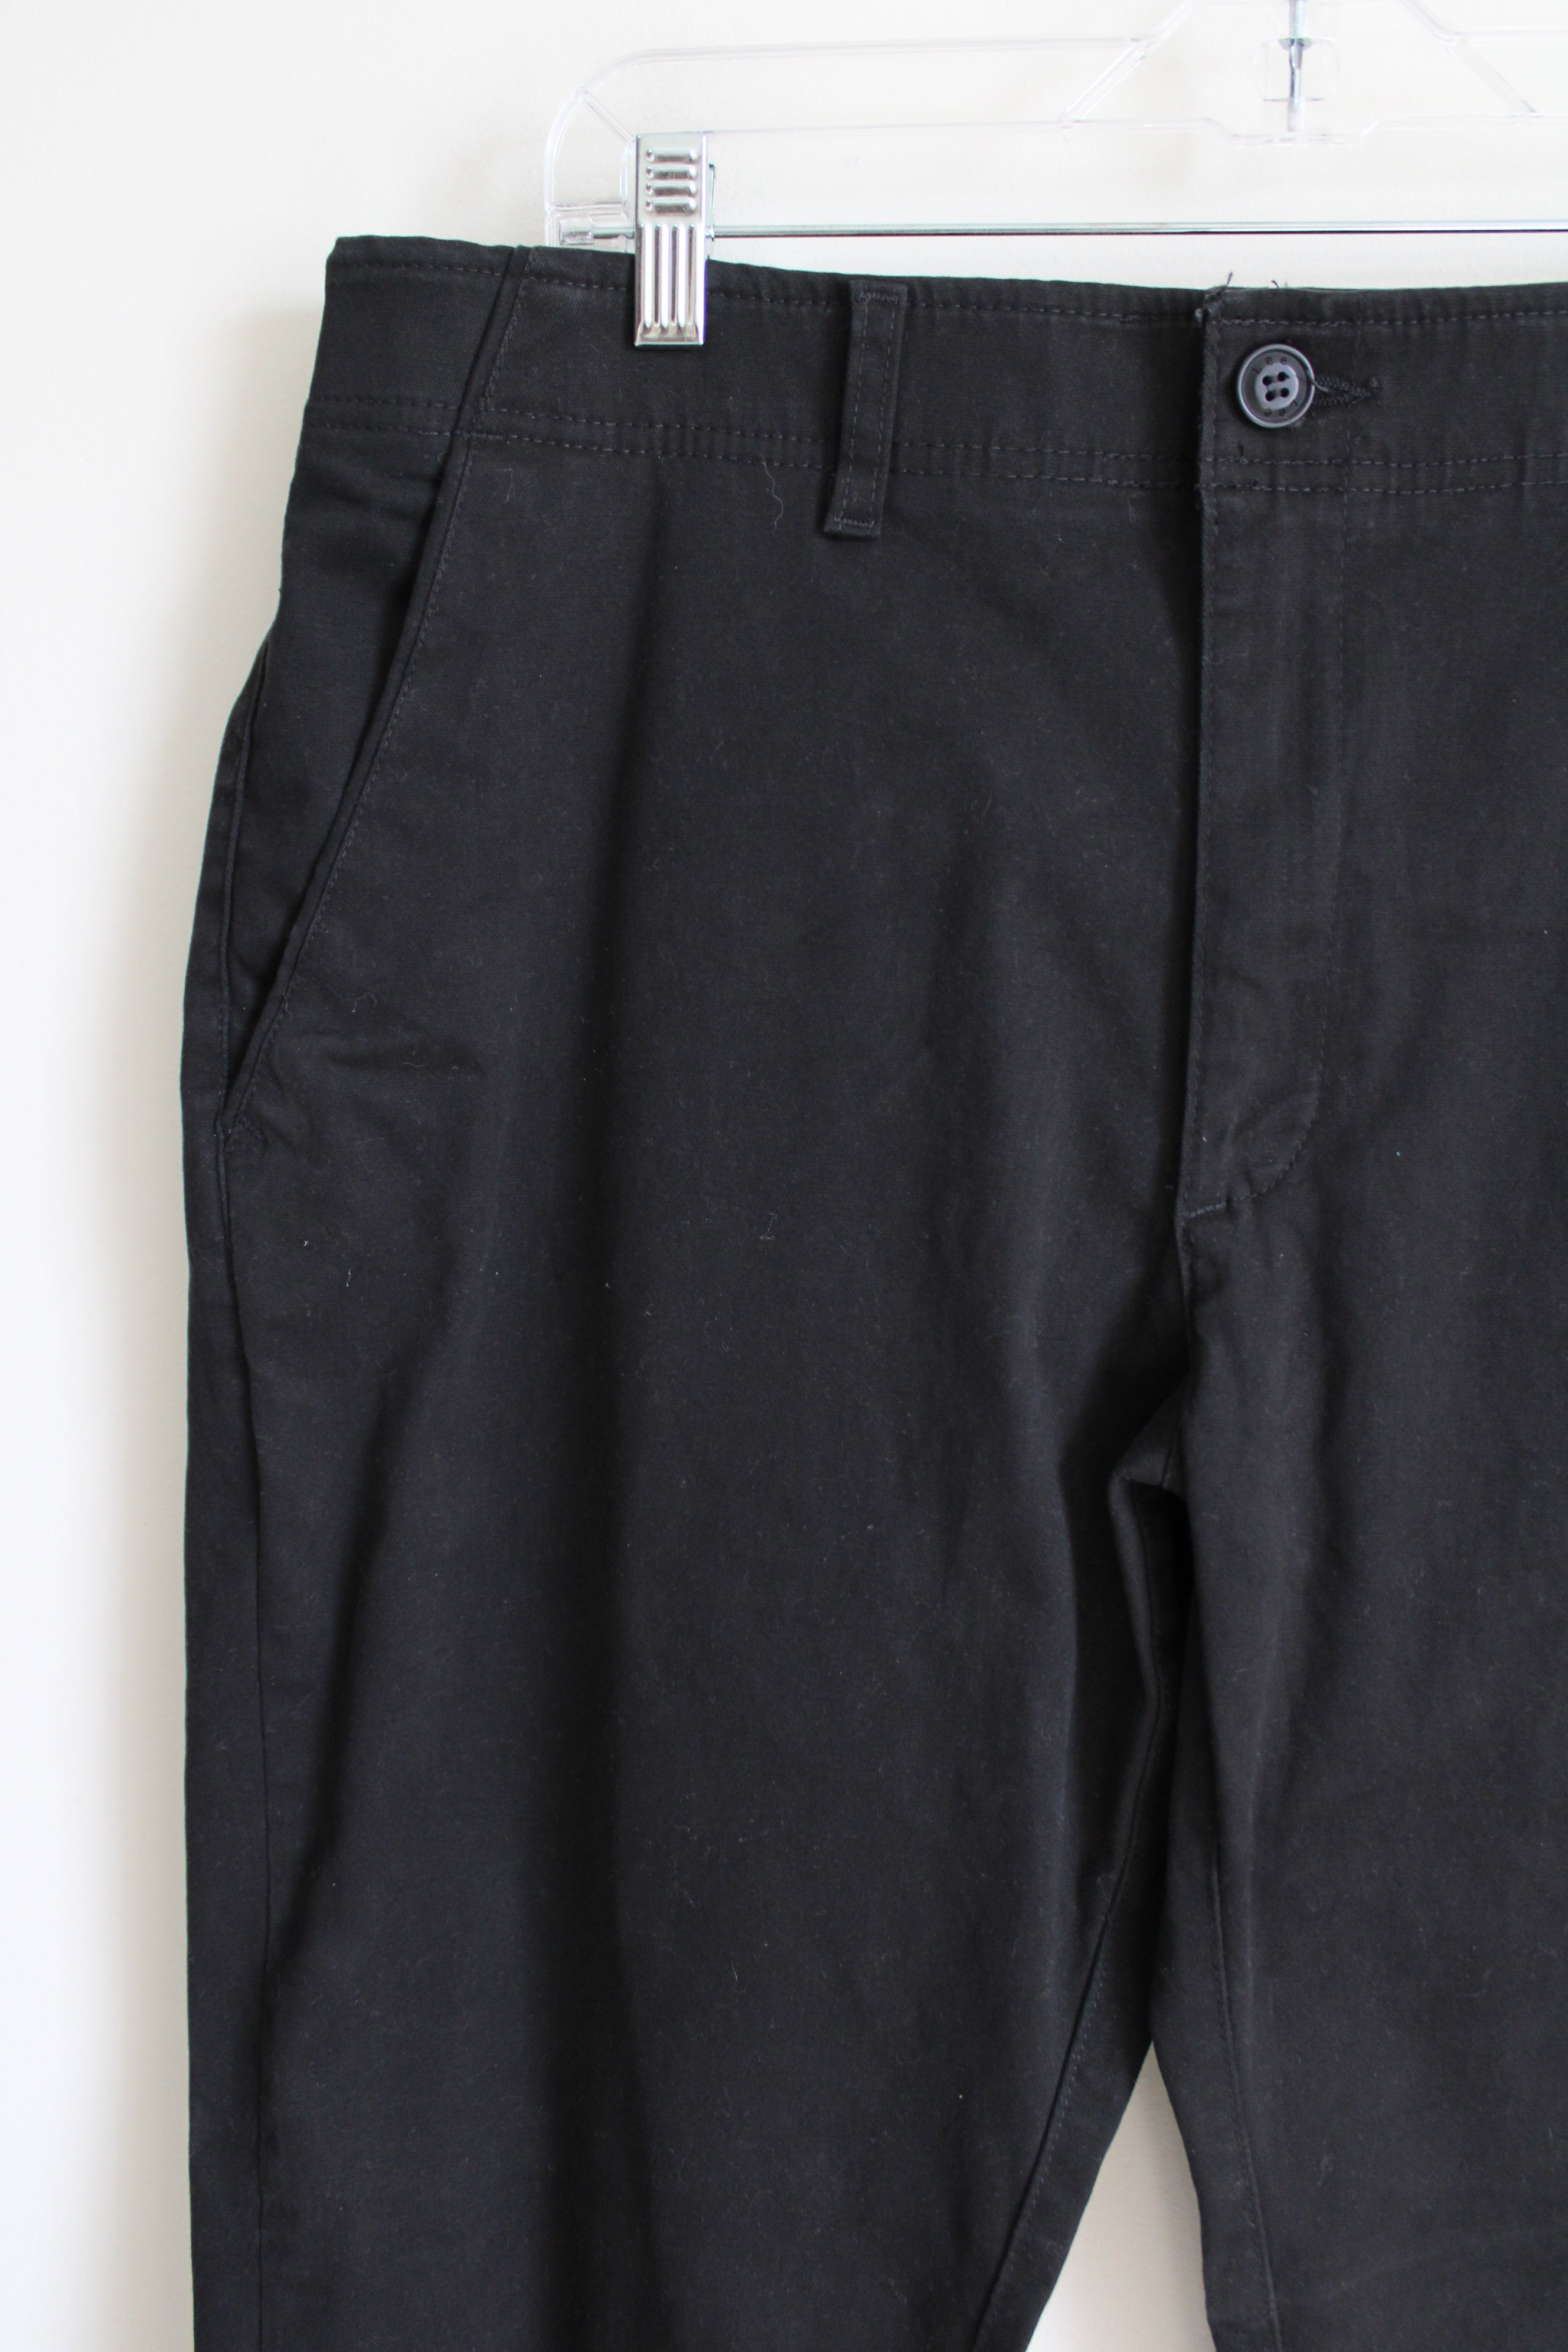 Lee Straight Fit Extreme Comfort Black Chino Pants | 36X29